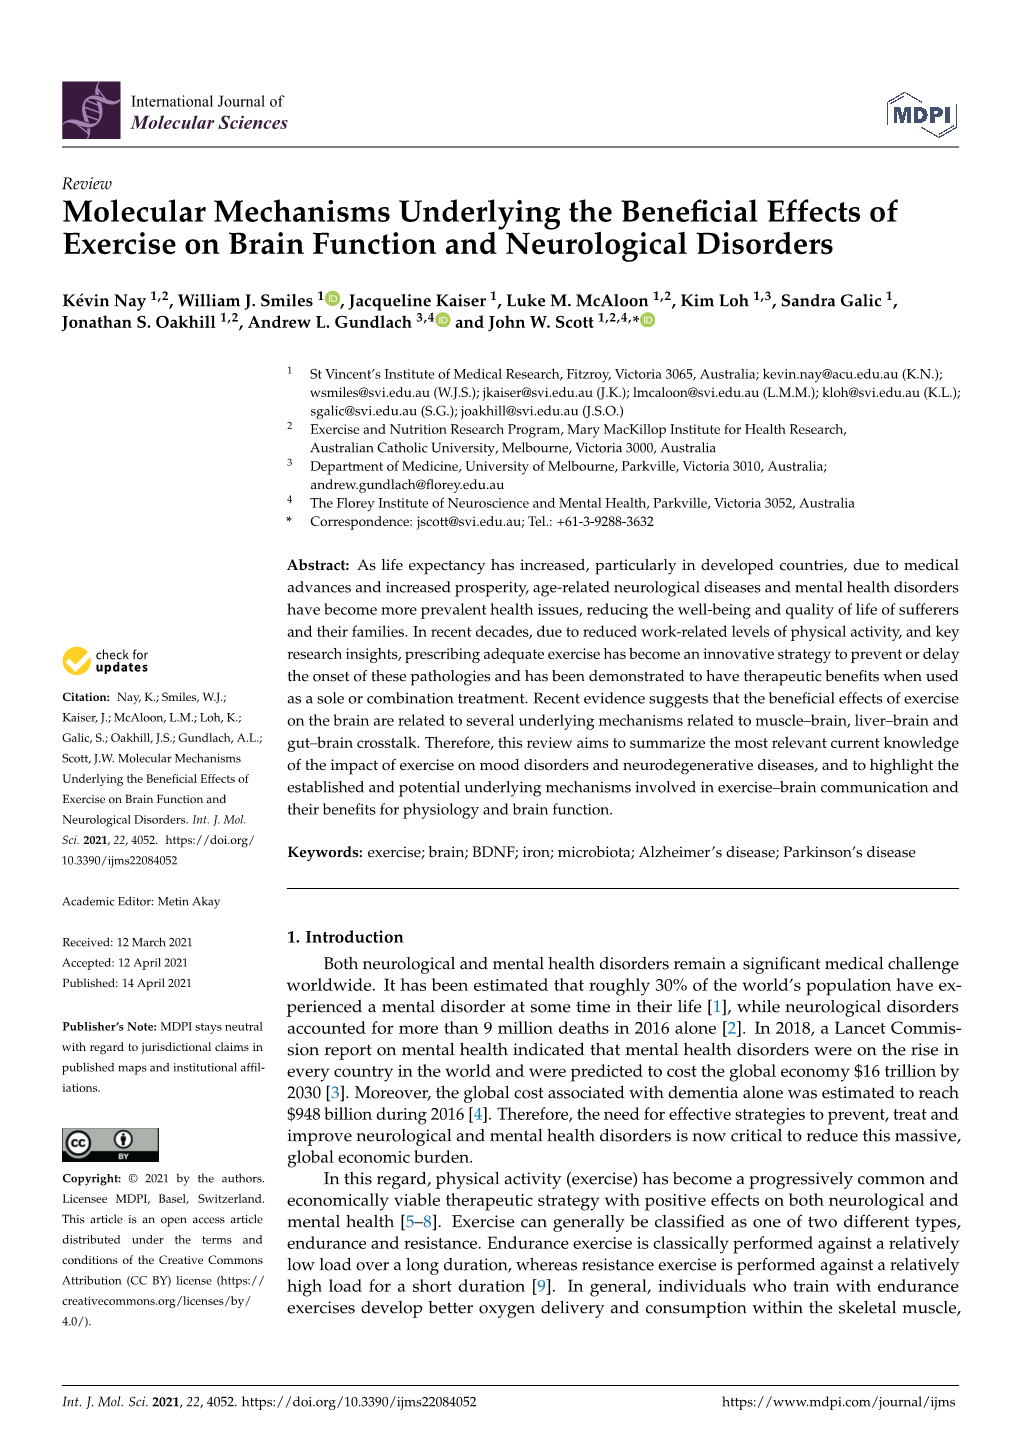 Molecular Mechanisms Underlying the Beneficial Effects of Exercise On